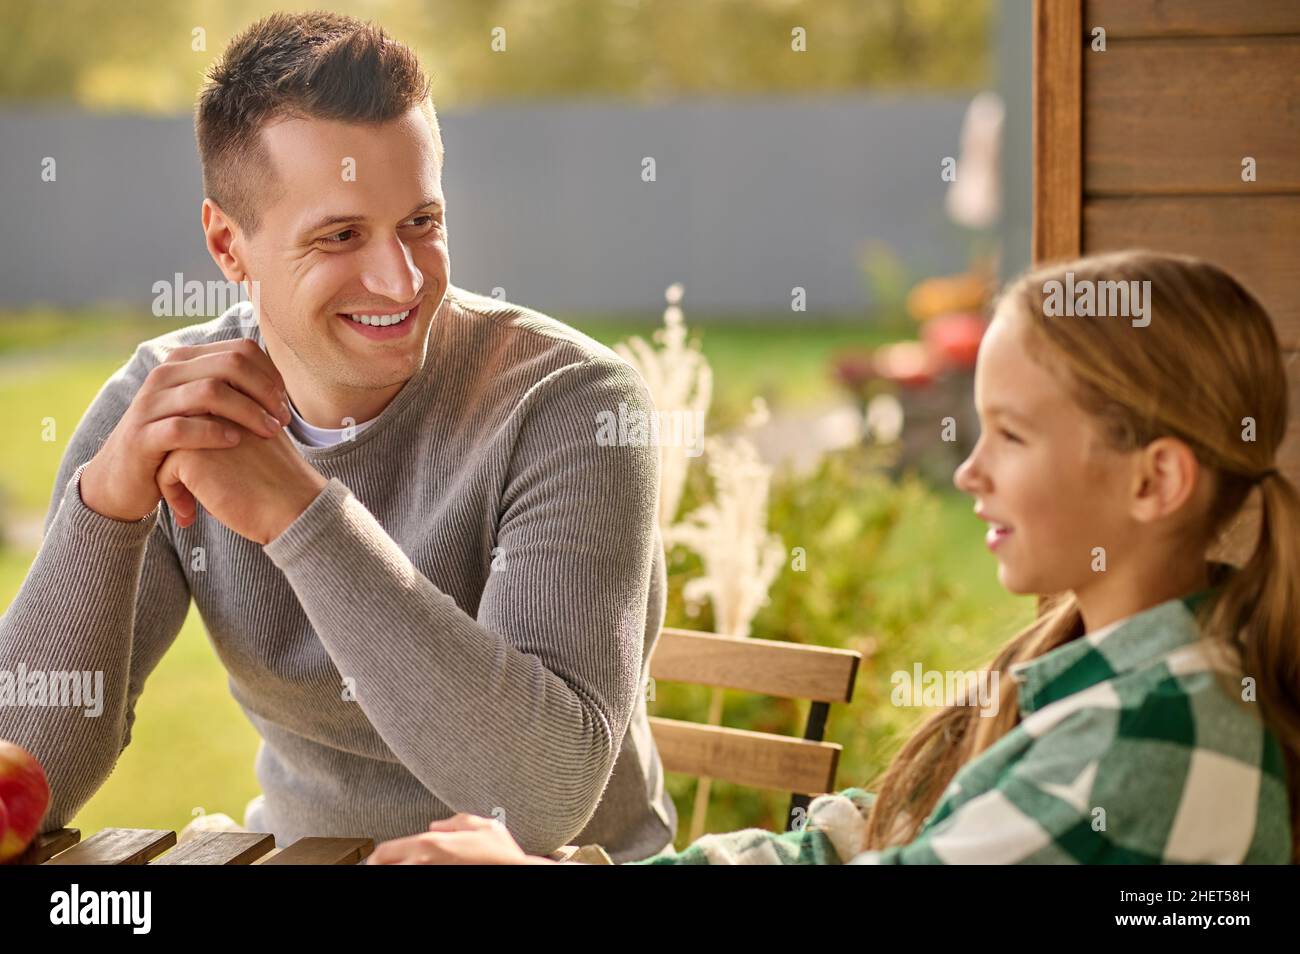 Man looking closely at girl telling story Stock Photo